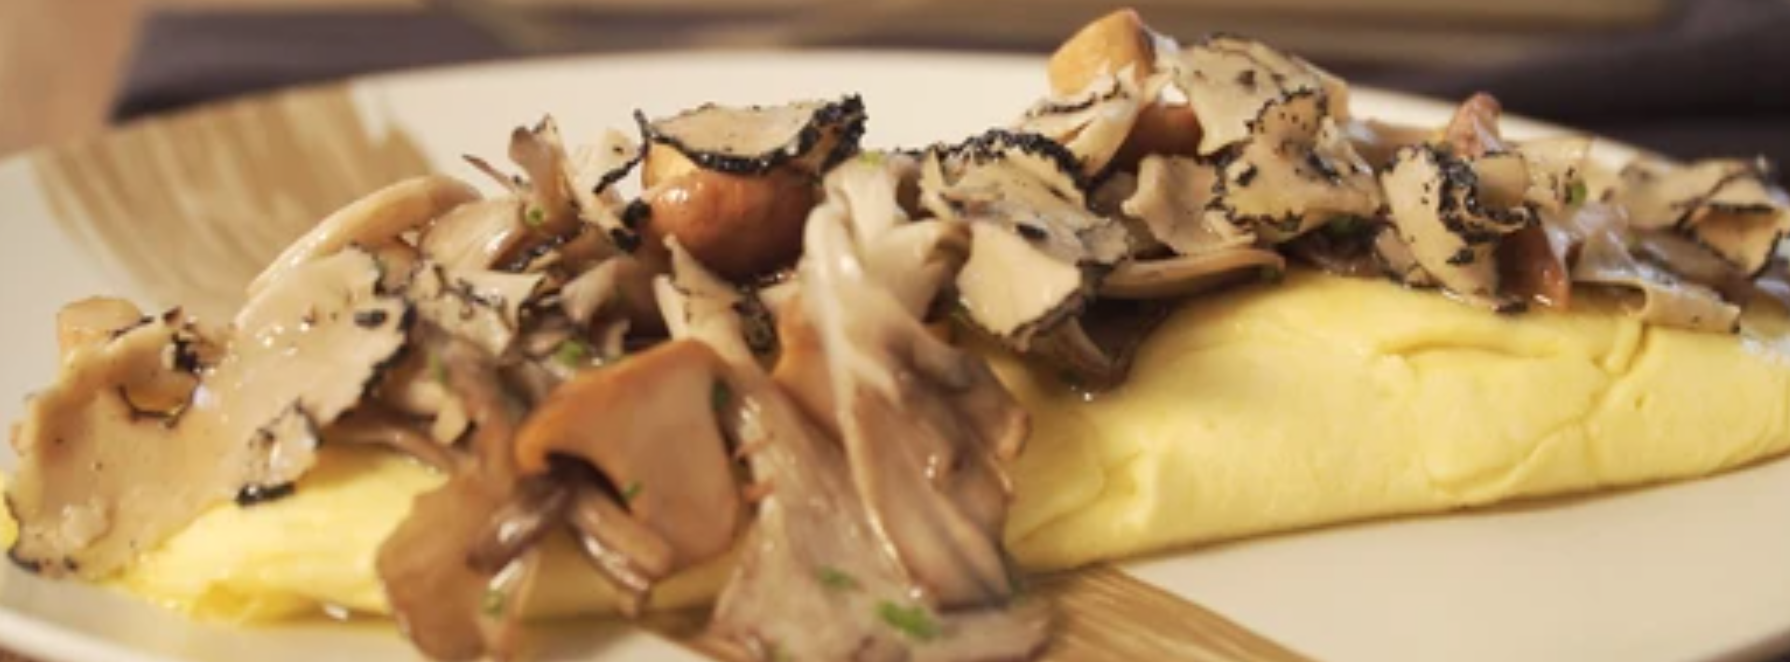 Image of French Omelette with Mushrooms & Truffles